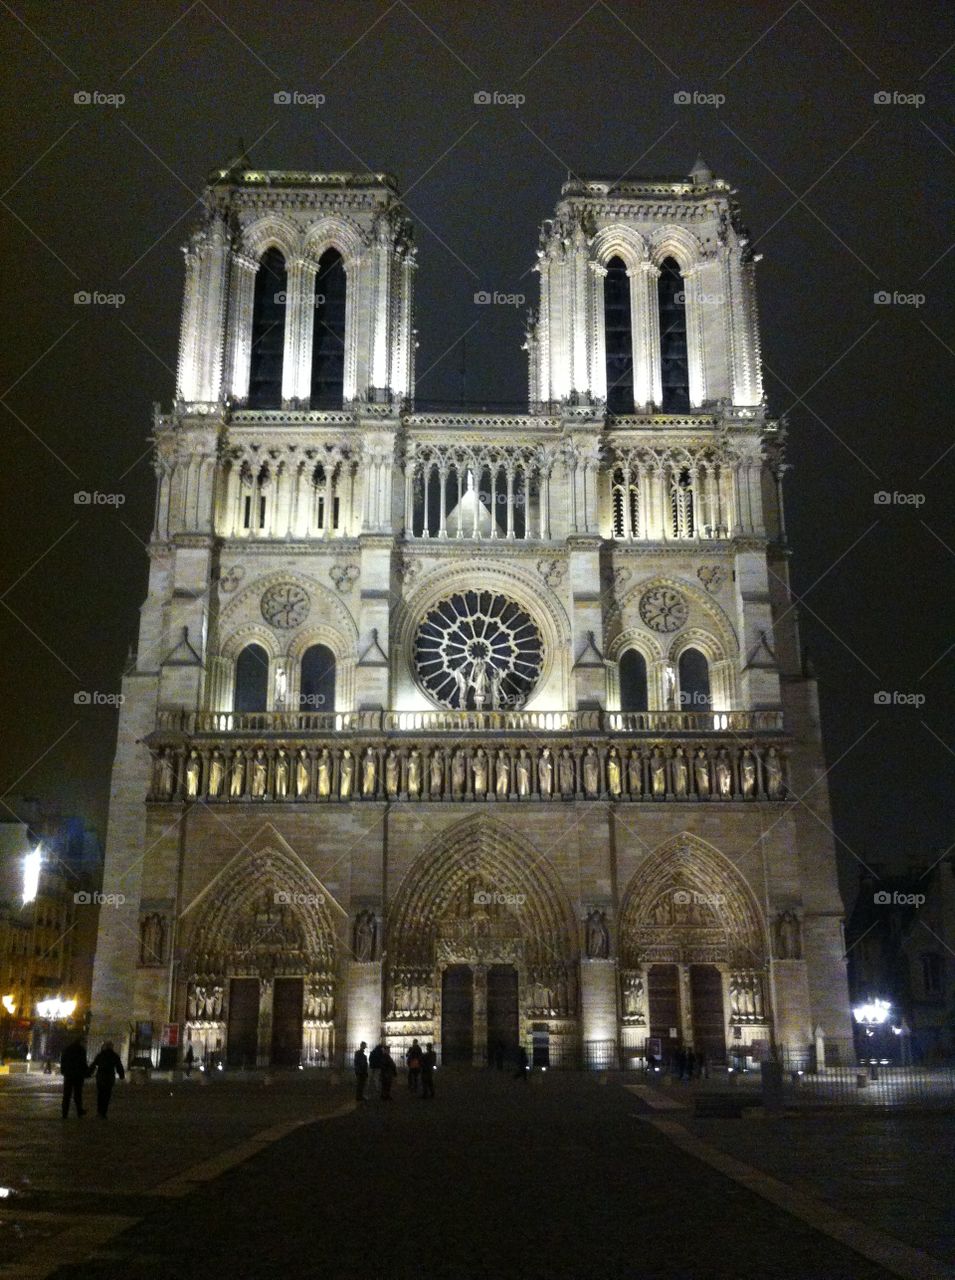 Paris, by night. Notre Dame